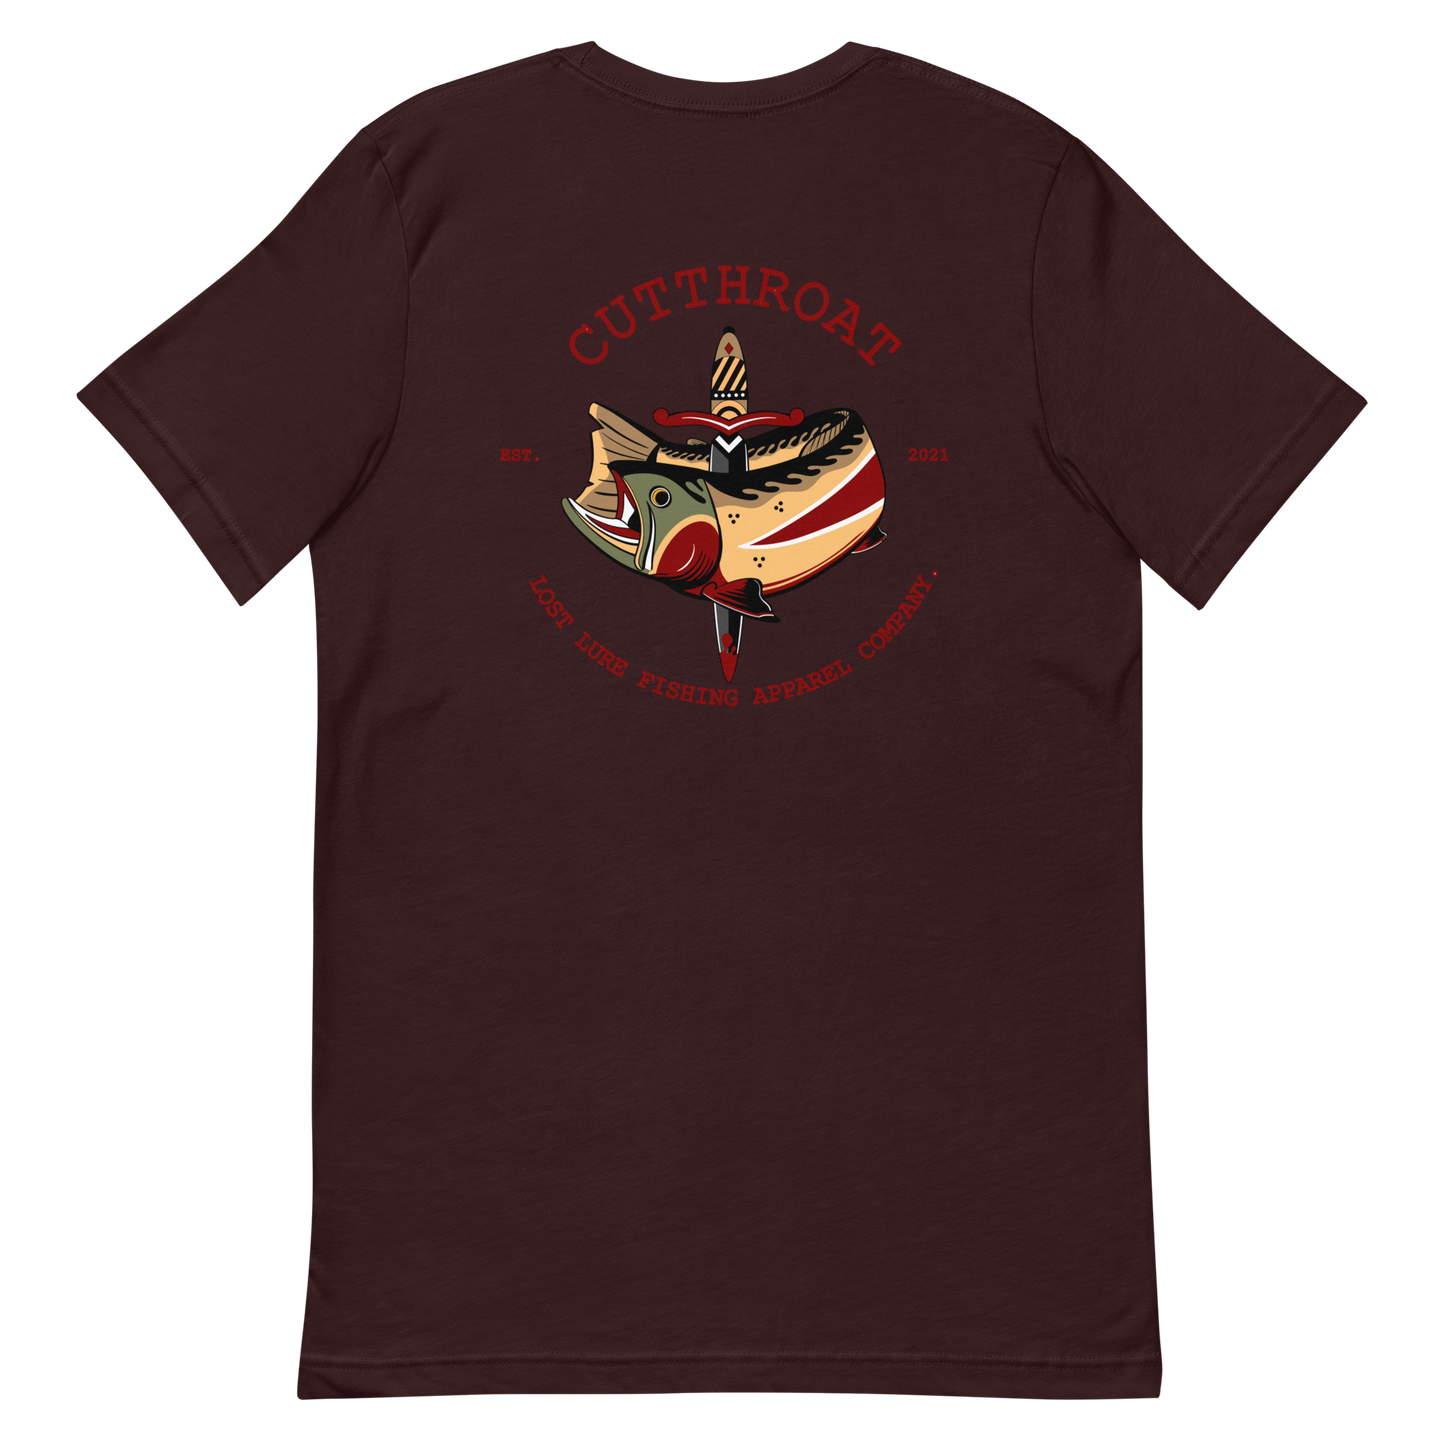 Cutthroat Trout fishing shirt. It’s an American traditional style design with a cutthroat trout and a dagger. The shirt reads Cutthroat trout, est. 2021, lost lure fishing apparel company. The front of the shirt has the lost lure logo. Dark maroon fishing shirt, back side